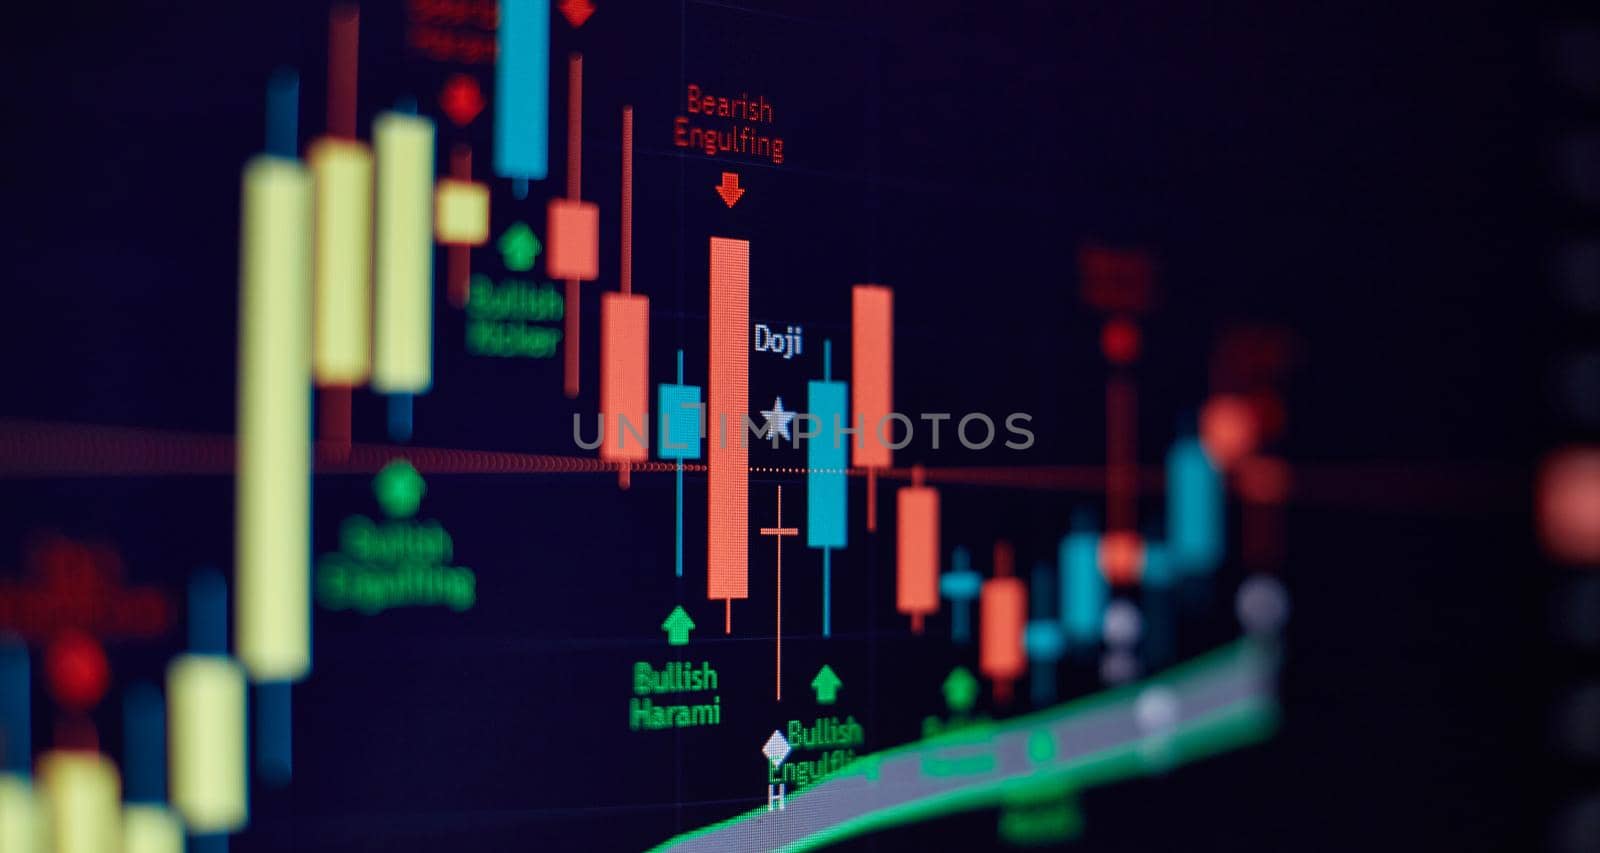 Abstract glowing forex chart interface wallpaper. Investment, trade, stock